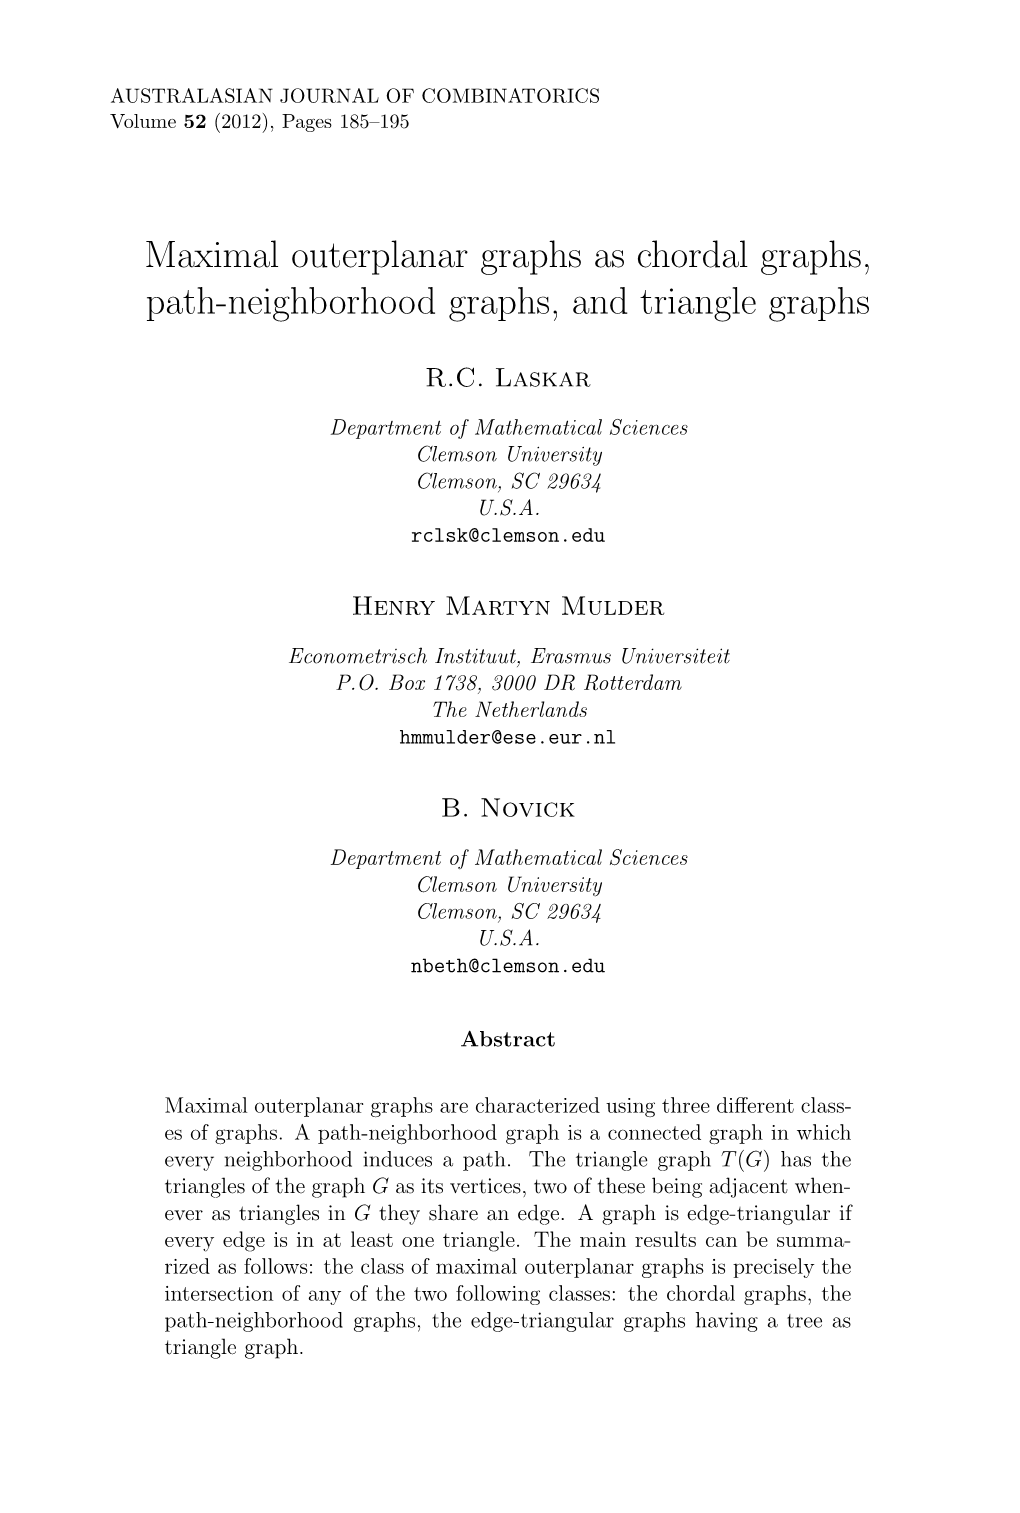 Maximal Outerplanar Graphs As Chordal Graphs, Path-Neighborhood Graphs, and Triangle Graphs